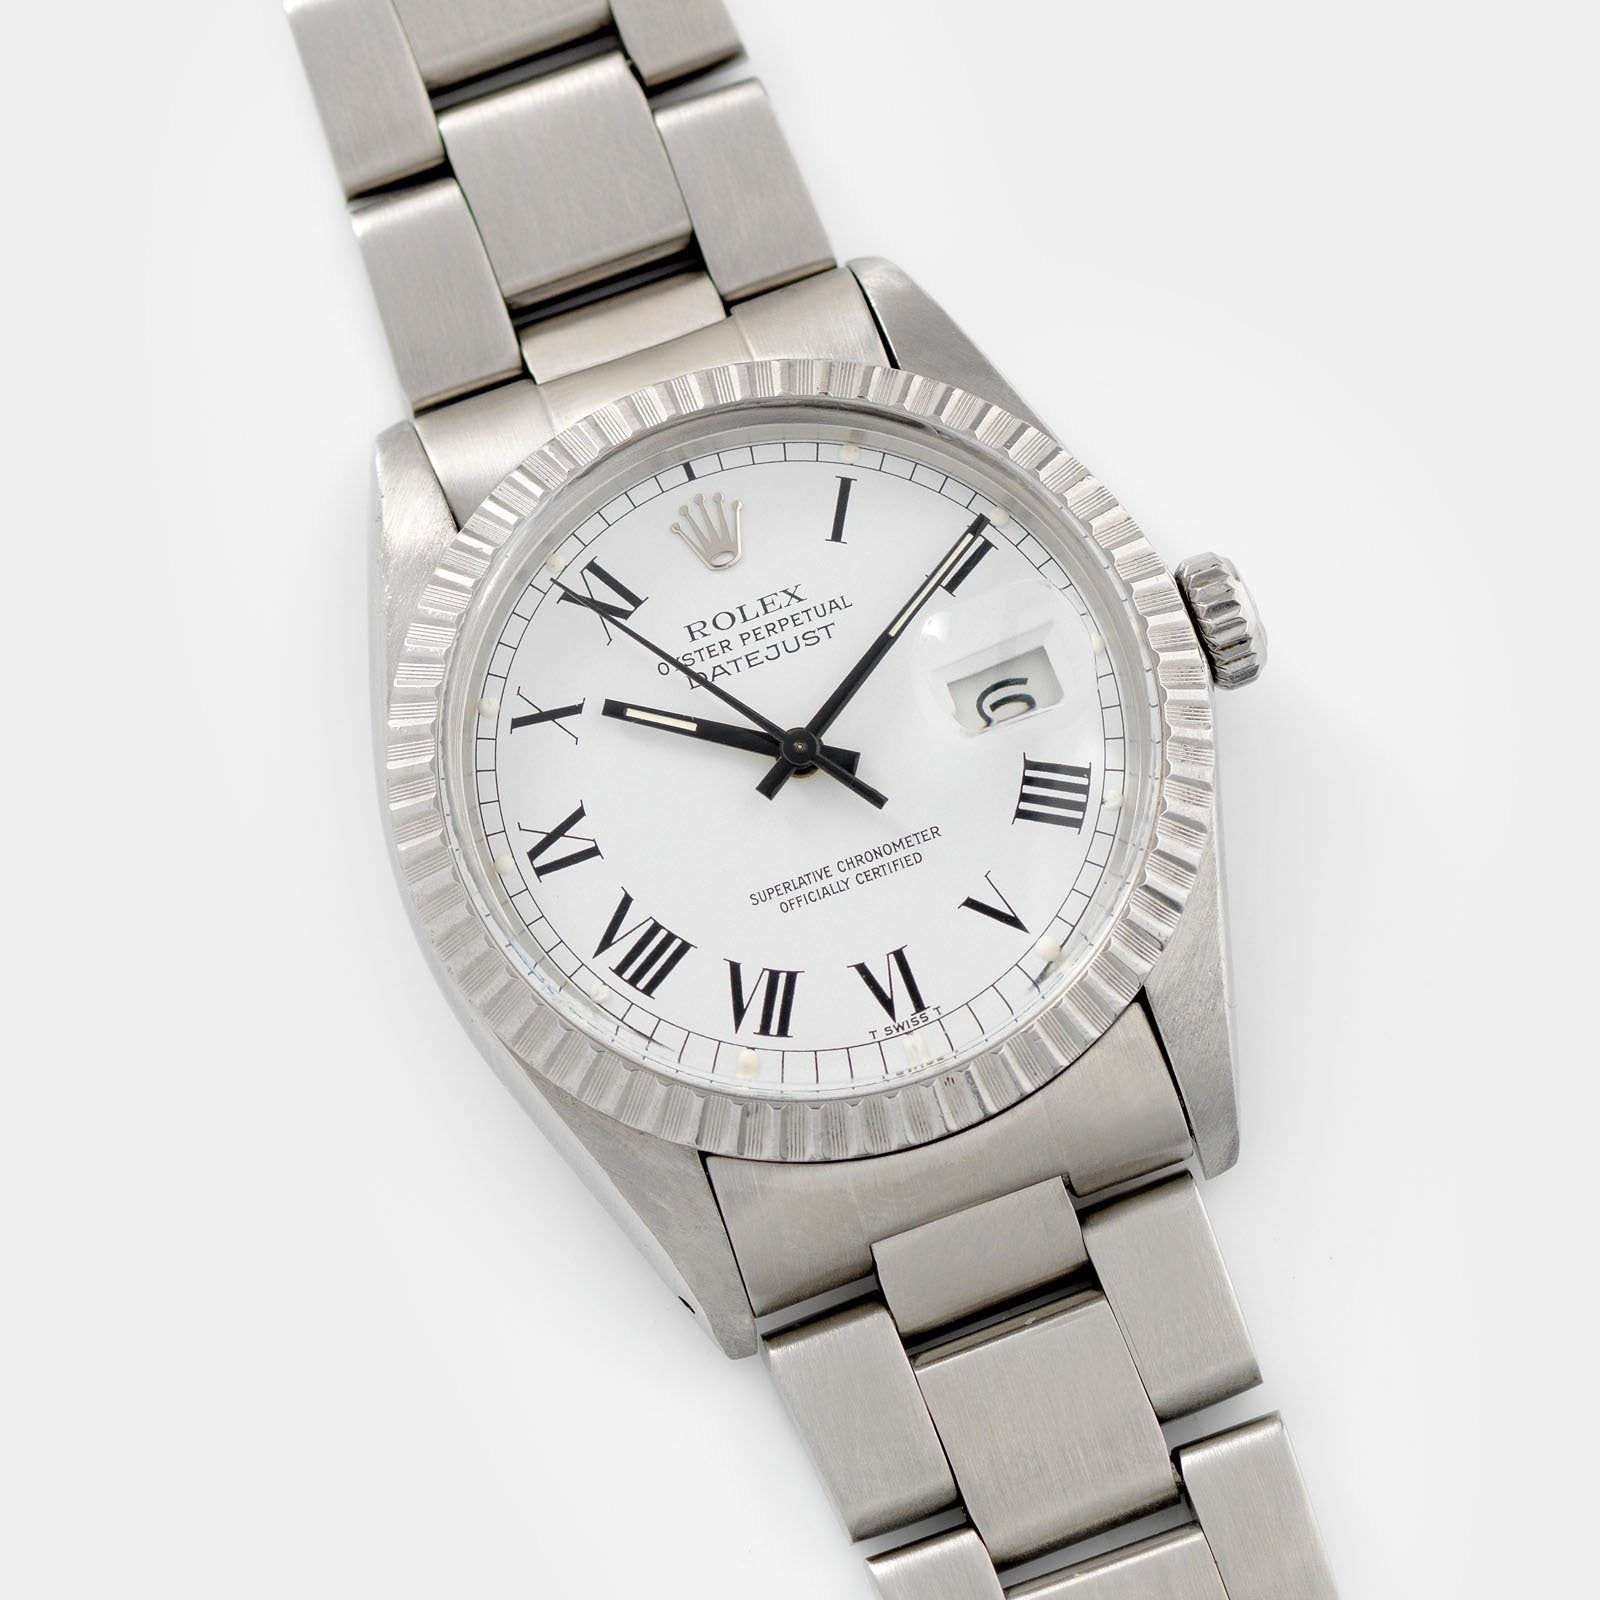 Rolex Datejust Reference 16030 White Buckley Dial on a Oyster bracelet